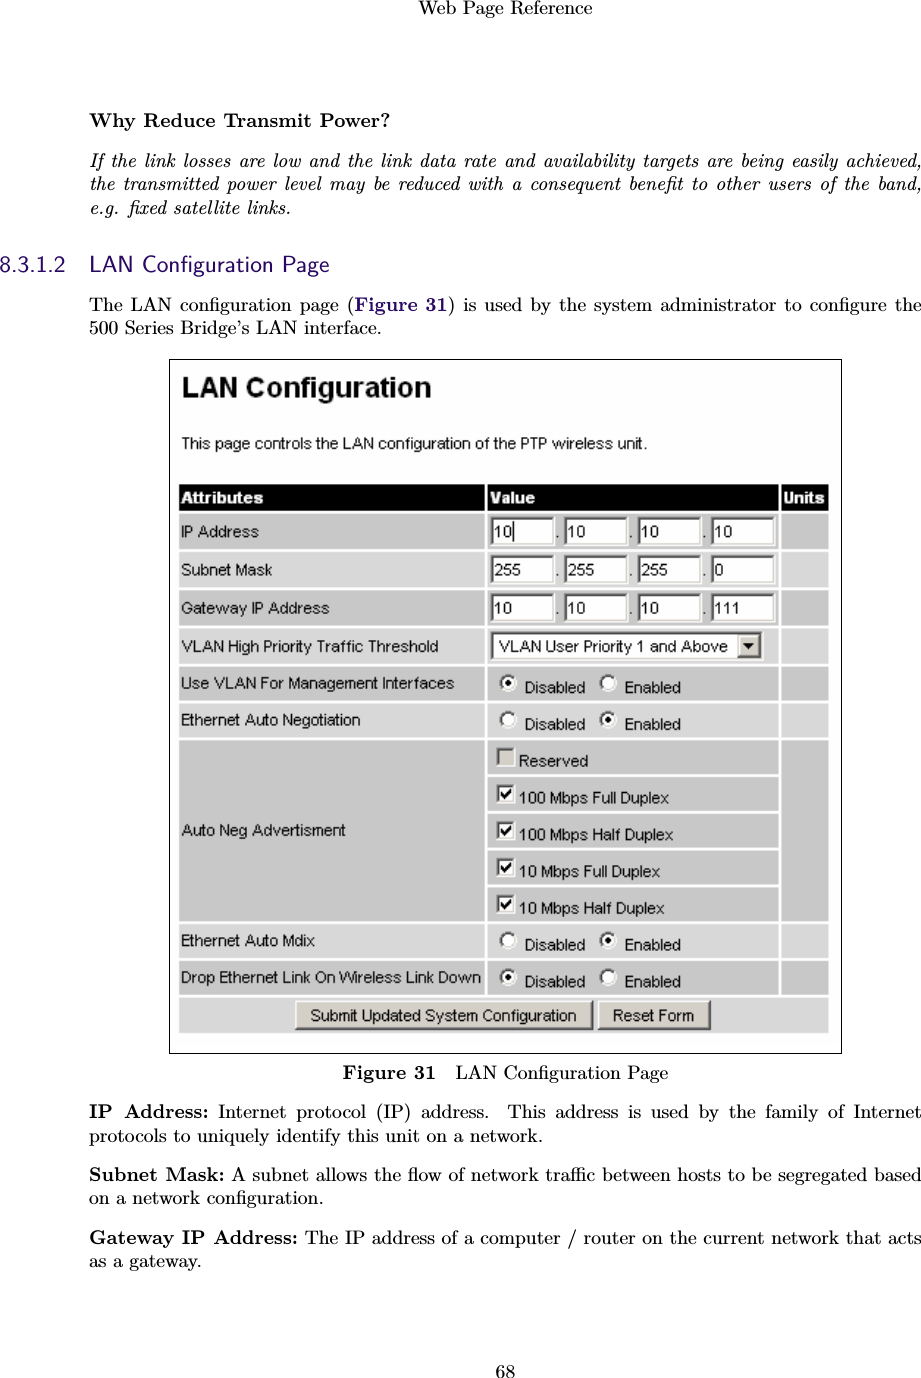 Web Page Reference68Why Reduce Transmit Power?If the link losses are low and the link data rate and availability targets are being easily achieved,the transmitted power level may be reduced with a consequent beneﬁt to other users of the band,e.g. ﬁxed satellite links.8.3.1.2 LAN Conﬁguration PageThe LAN conﬁguration page (Figure 31) is used by the system administrator to conﬁgure the500 Series Bridge’s LAN interface.Figure 31 LAN Conﬁguration PageIP Address: Internet protocol (IP) address. This address is used by the family of Internetprotocols to uniquely identify this unit on a network.Subnet Mask: A subnet allows the ﬂow of network traﬃc between hosts to be segregated basedon a network conﬁguration.Gateway IP Address: The IP address of a computer / router on the current network that actsas a gateway.